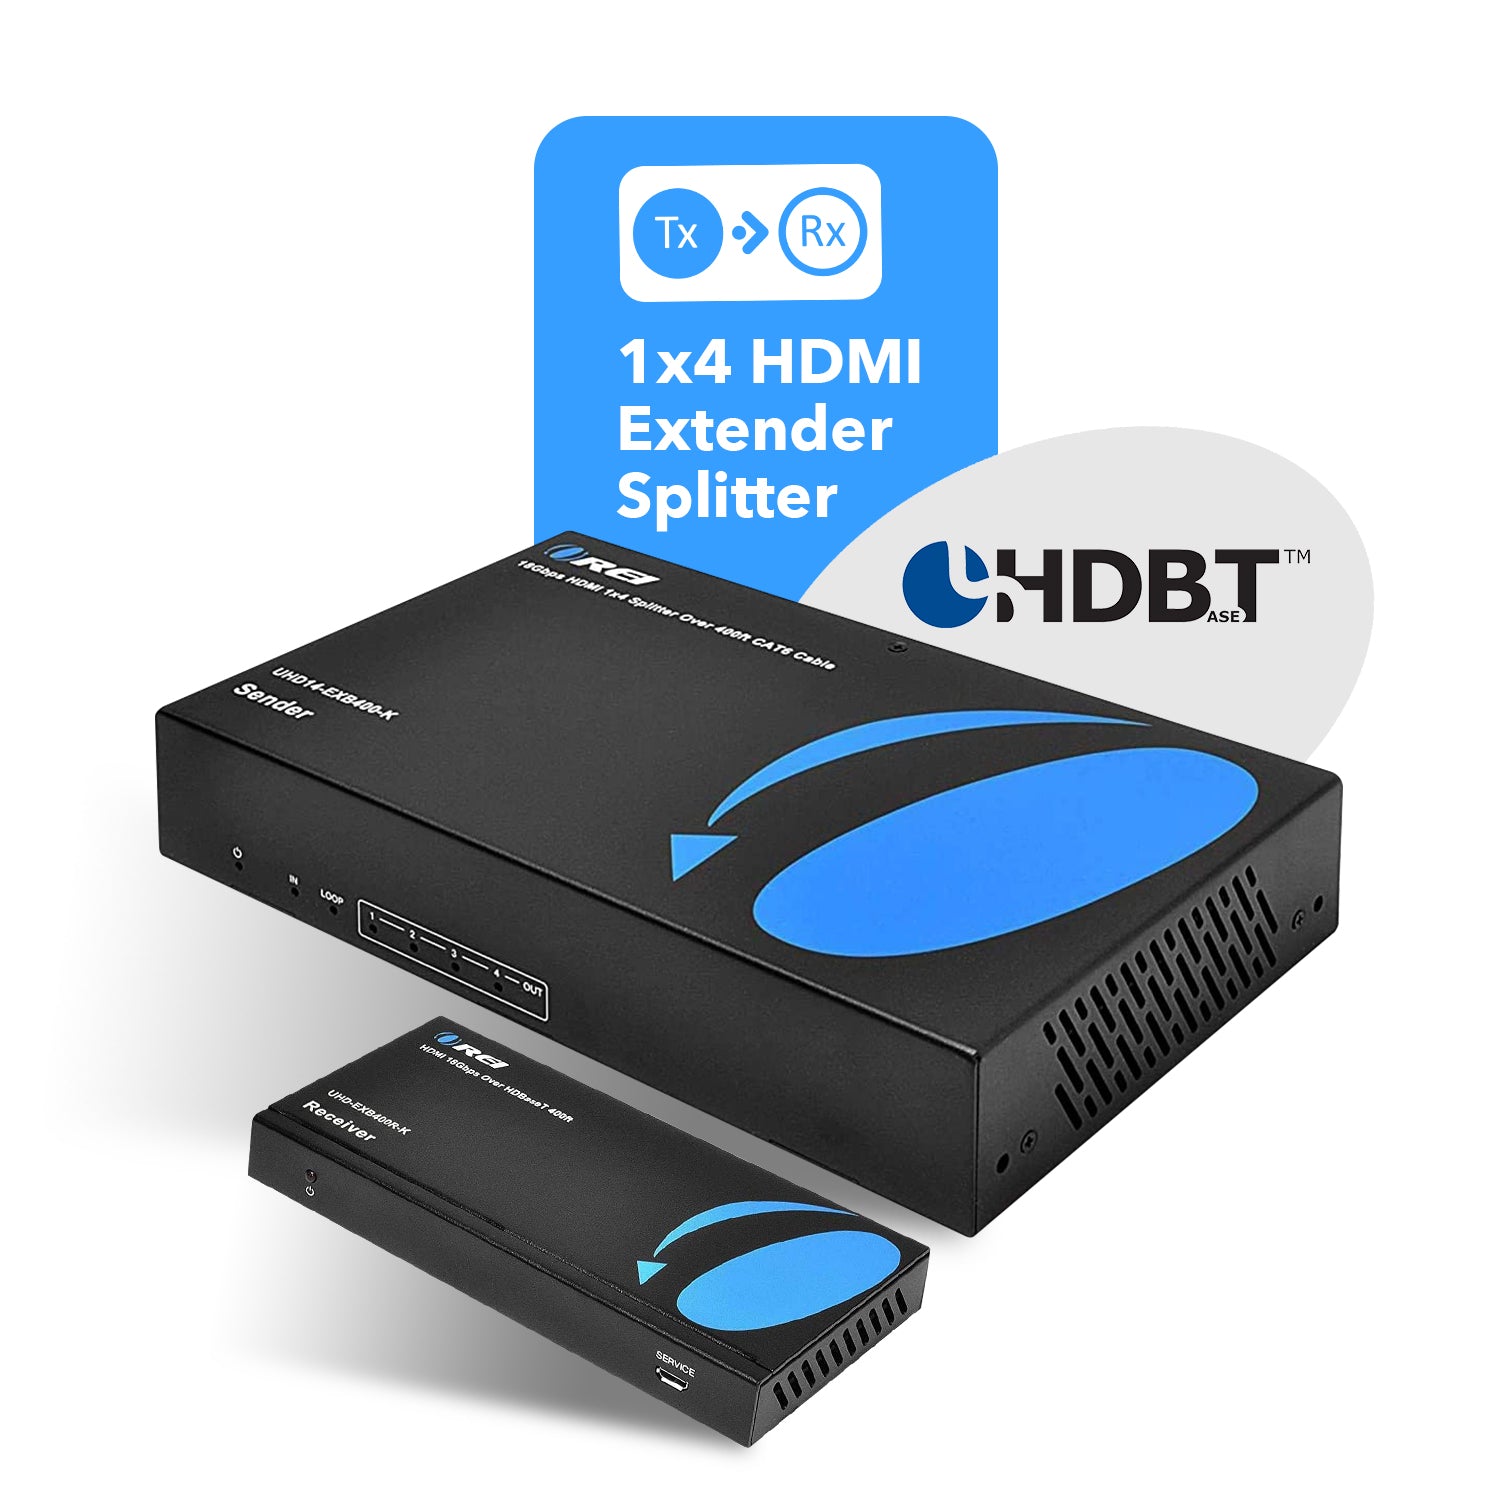 4 Ports True 4K HDMI Video Splitter with EDID and HDCP, VKSM-6G14